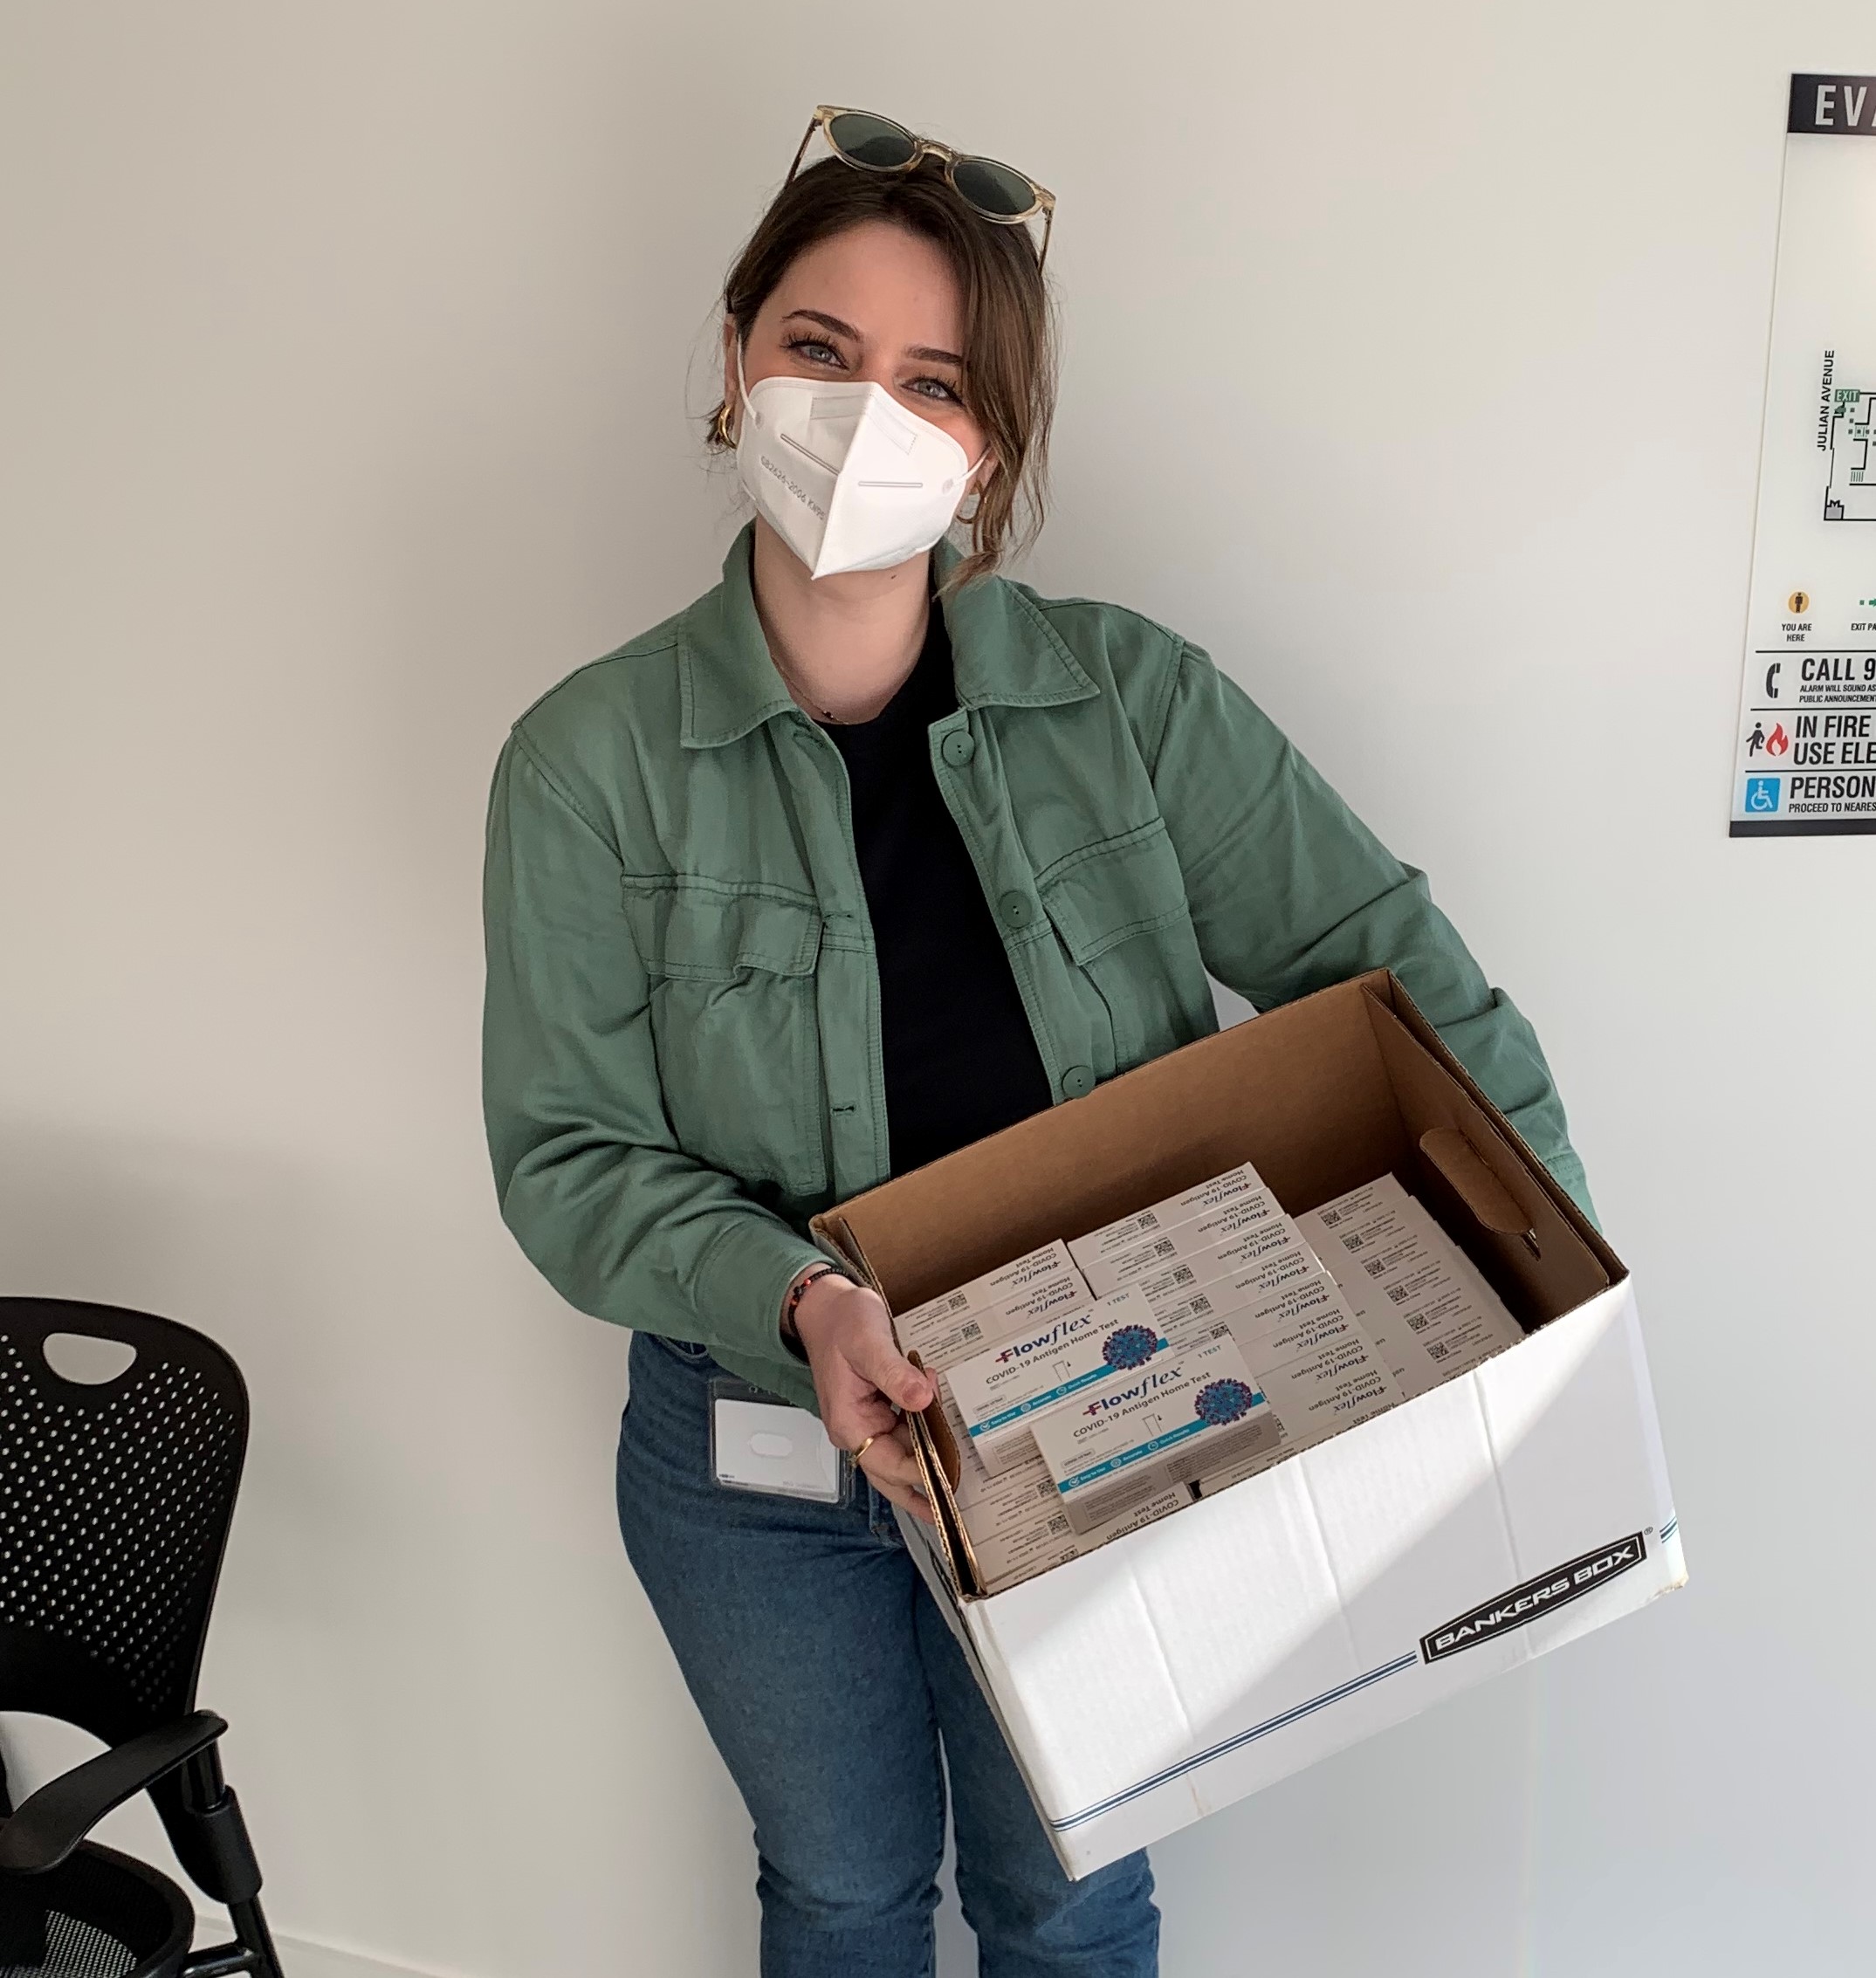 Vjola Jorgji is facing the camera directly. She is wearing a facmask. She is holding a box with Rapid COVID-19 tests to be distributed to patients.